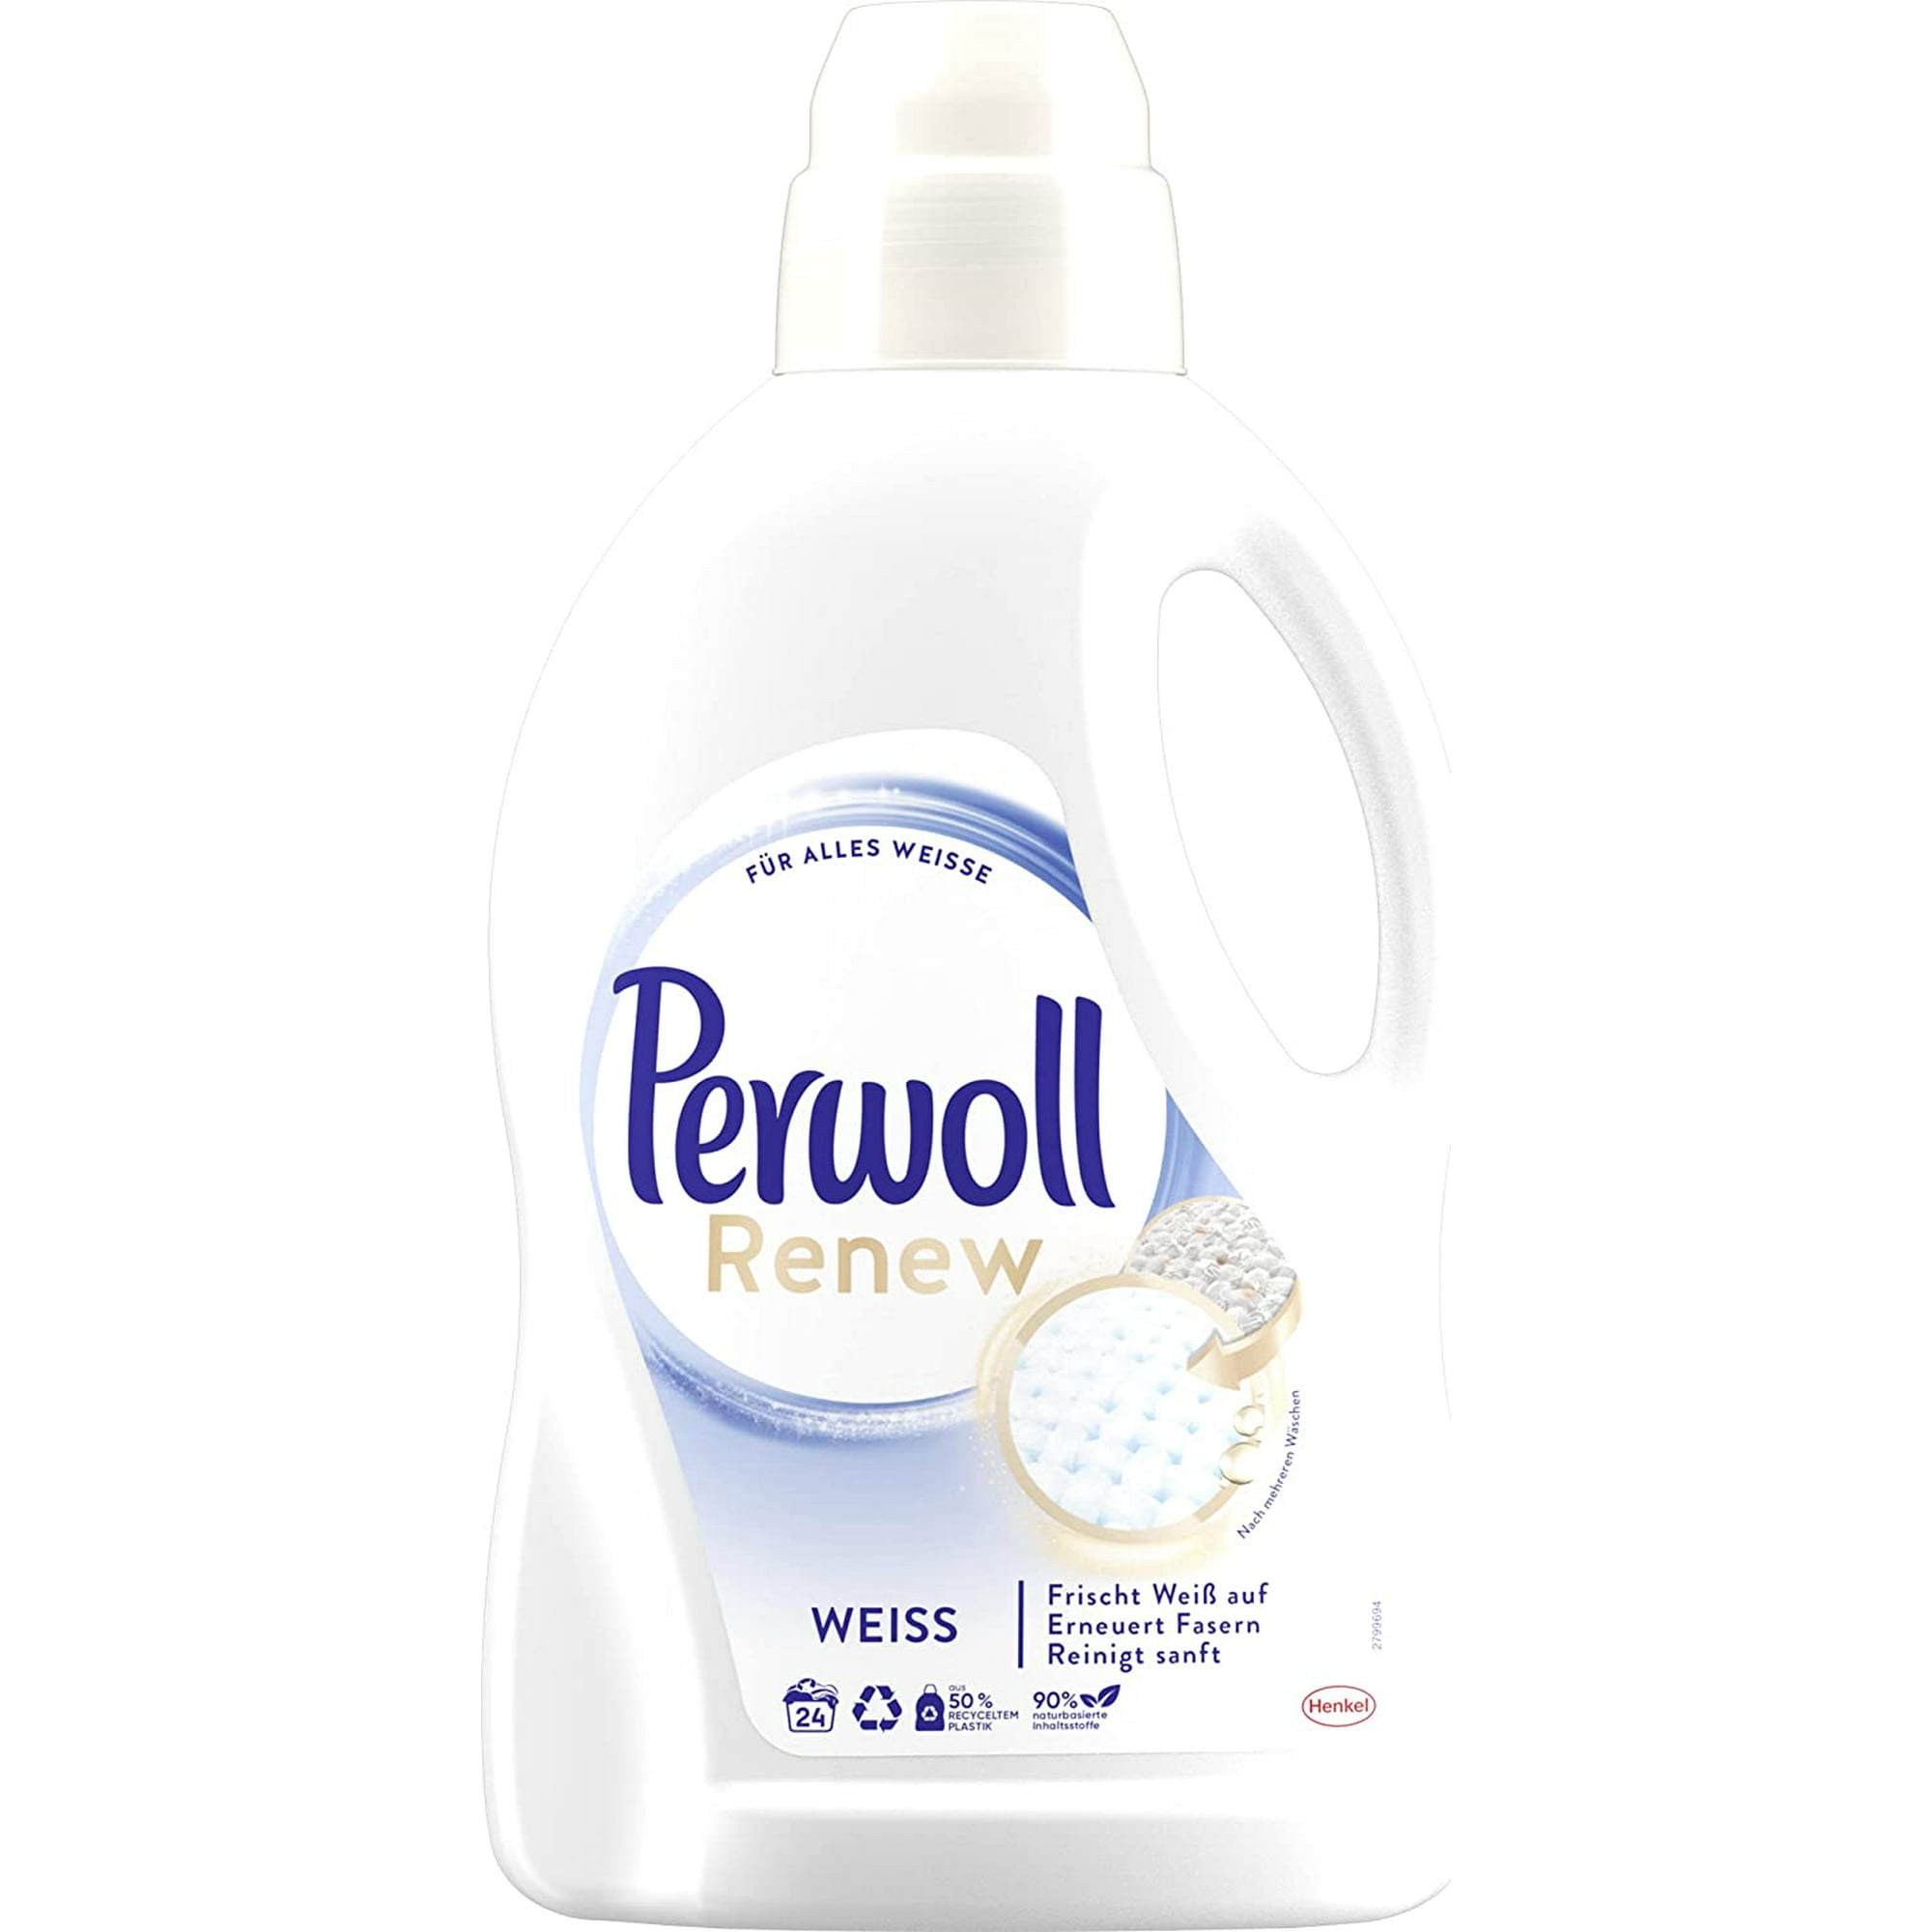 Perwoll Renew & Repair for White Clothes 1.44 L (24 Washes)